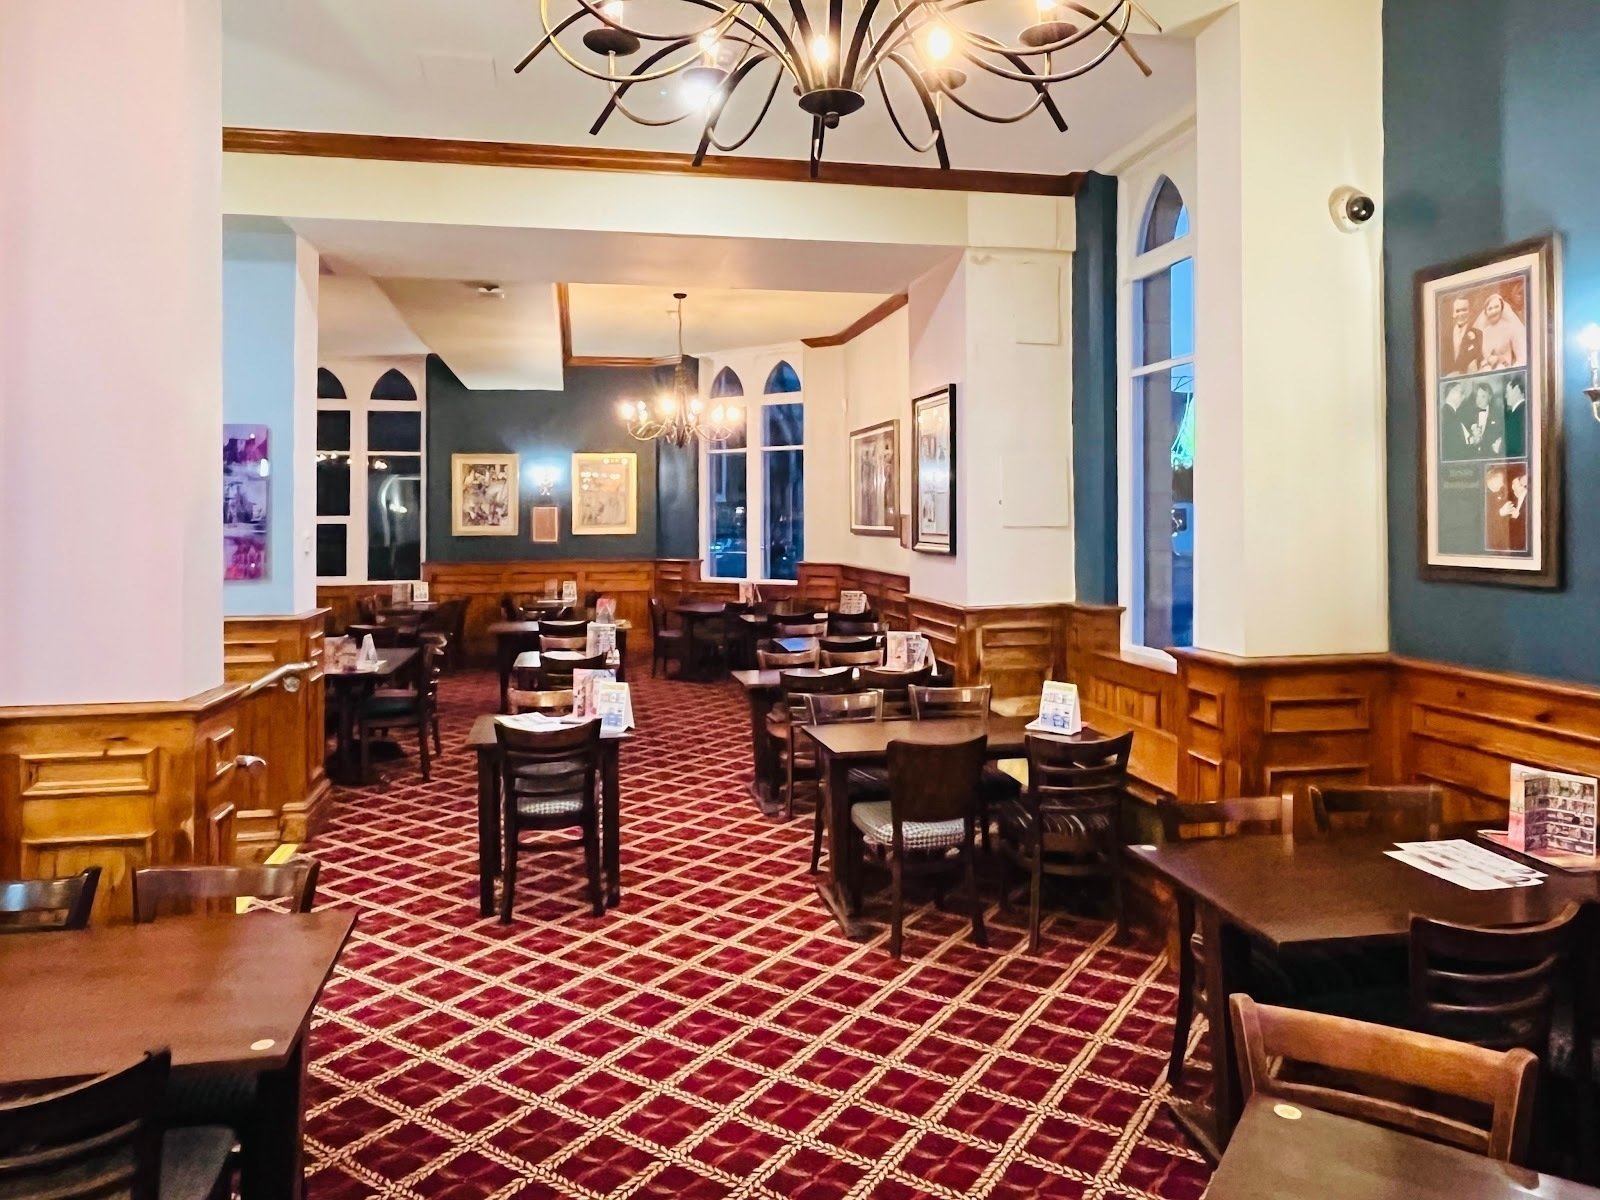 <span class="translation_missing" title="translation missing: en.meta.location_title, location_name: The Society Rooms - JD Wetherspoon, city: Macclesfield">Location Title</span>